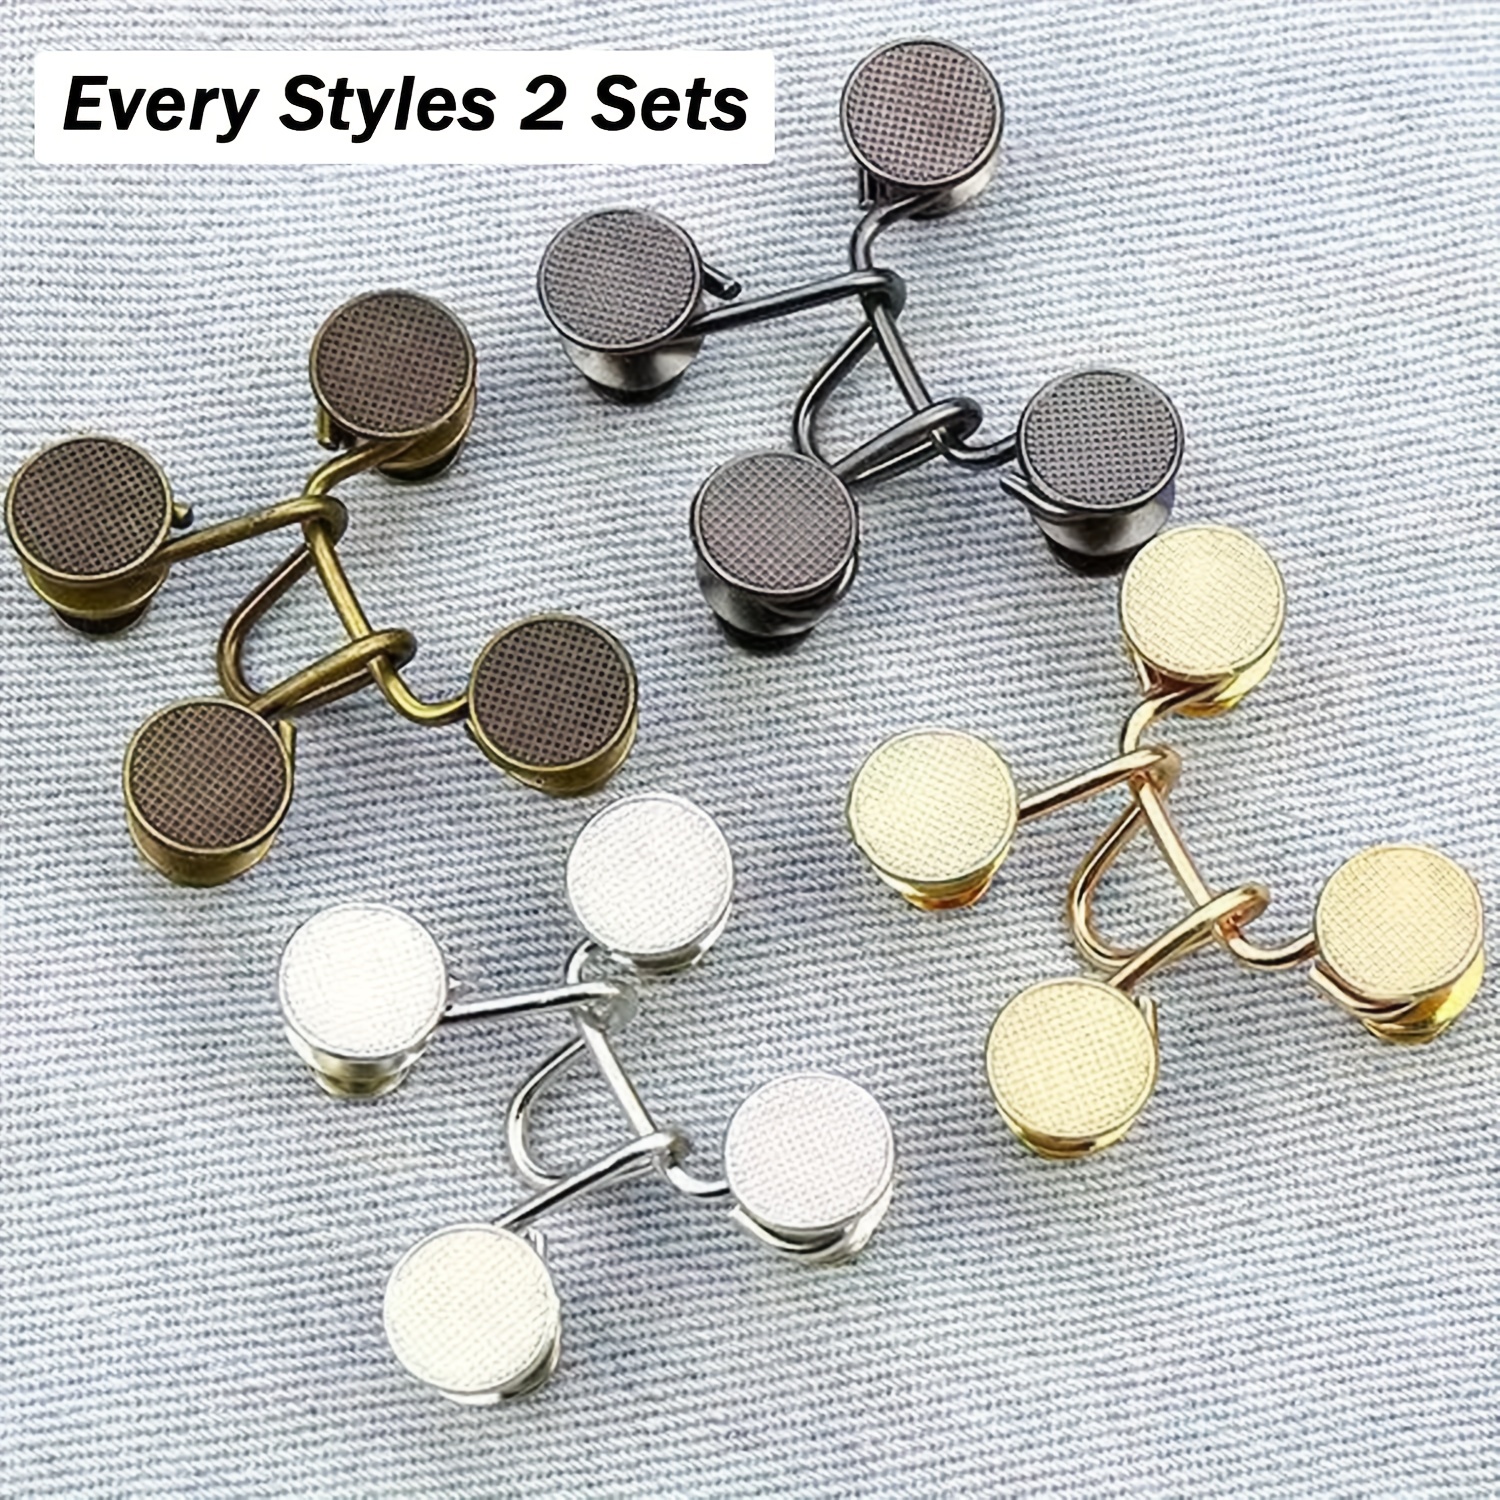 Waistband Tightener, Waist Tightener for Trousers 4 Sets Jean Buttons Pins,  No Sewing Required Pant Waist Tightener Adjustable Waist Buckle Extender